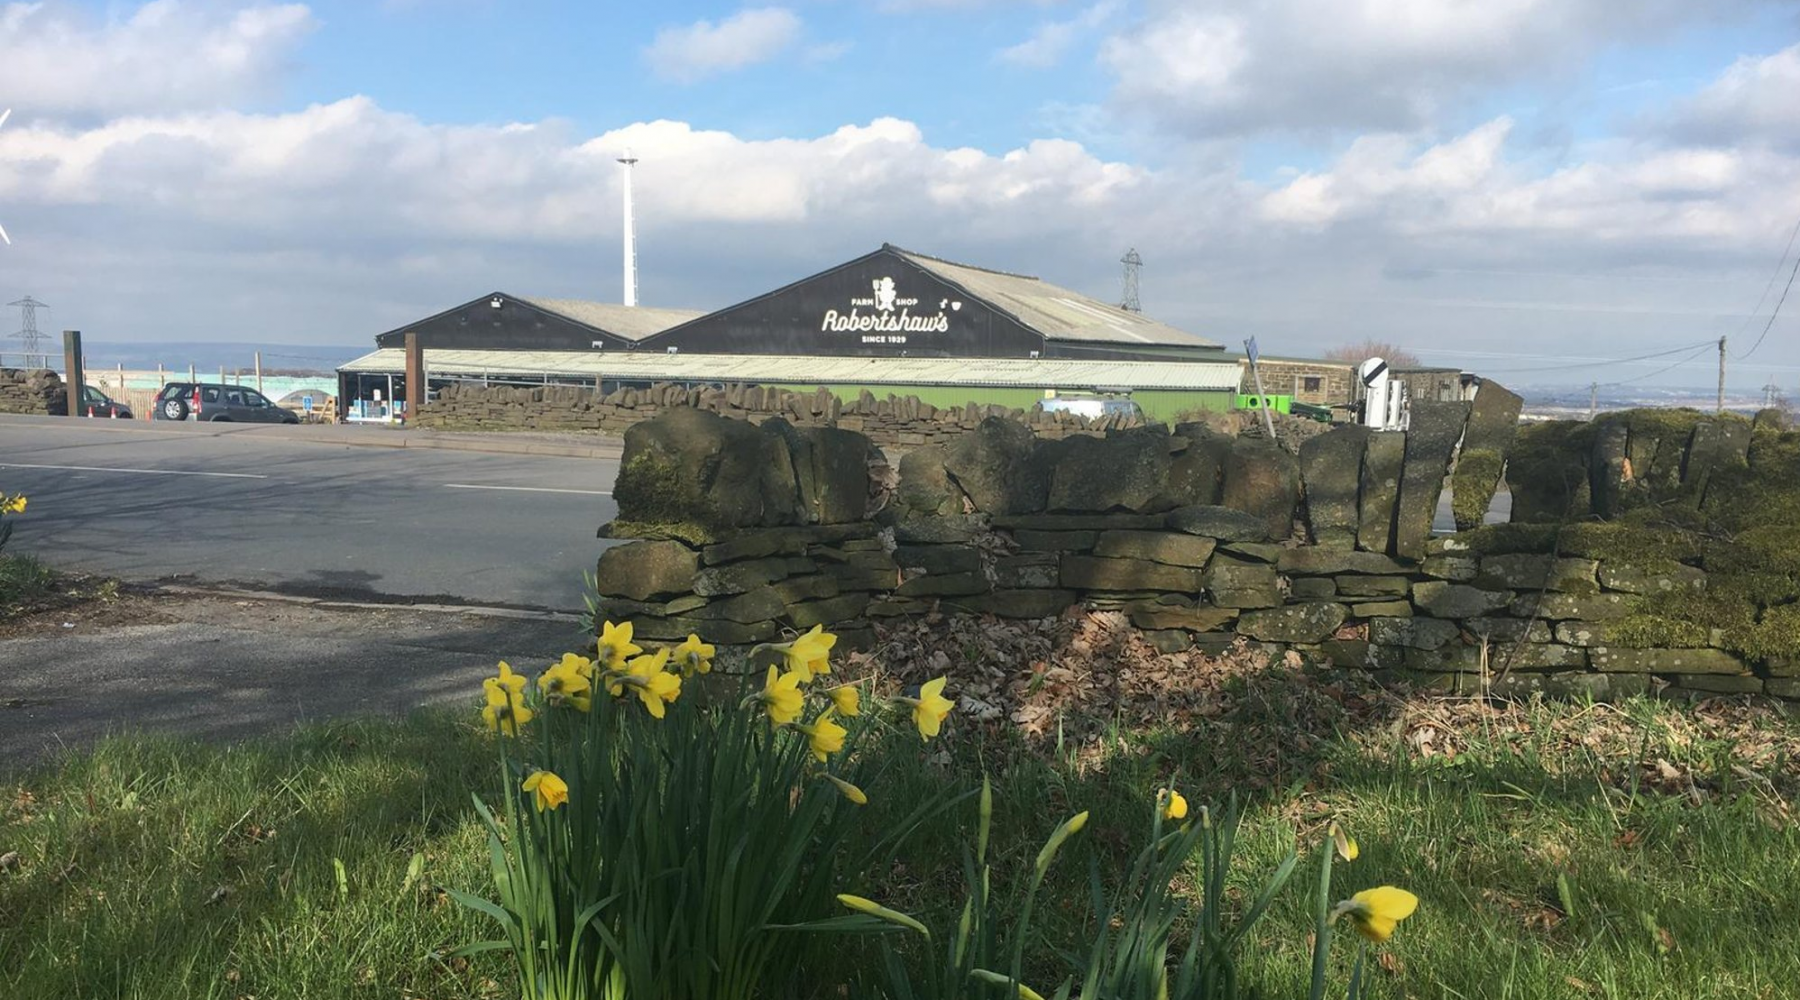 Robertshaw’s Farm Shop wins prize in the Rural…